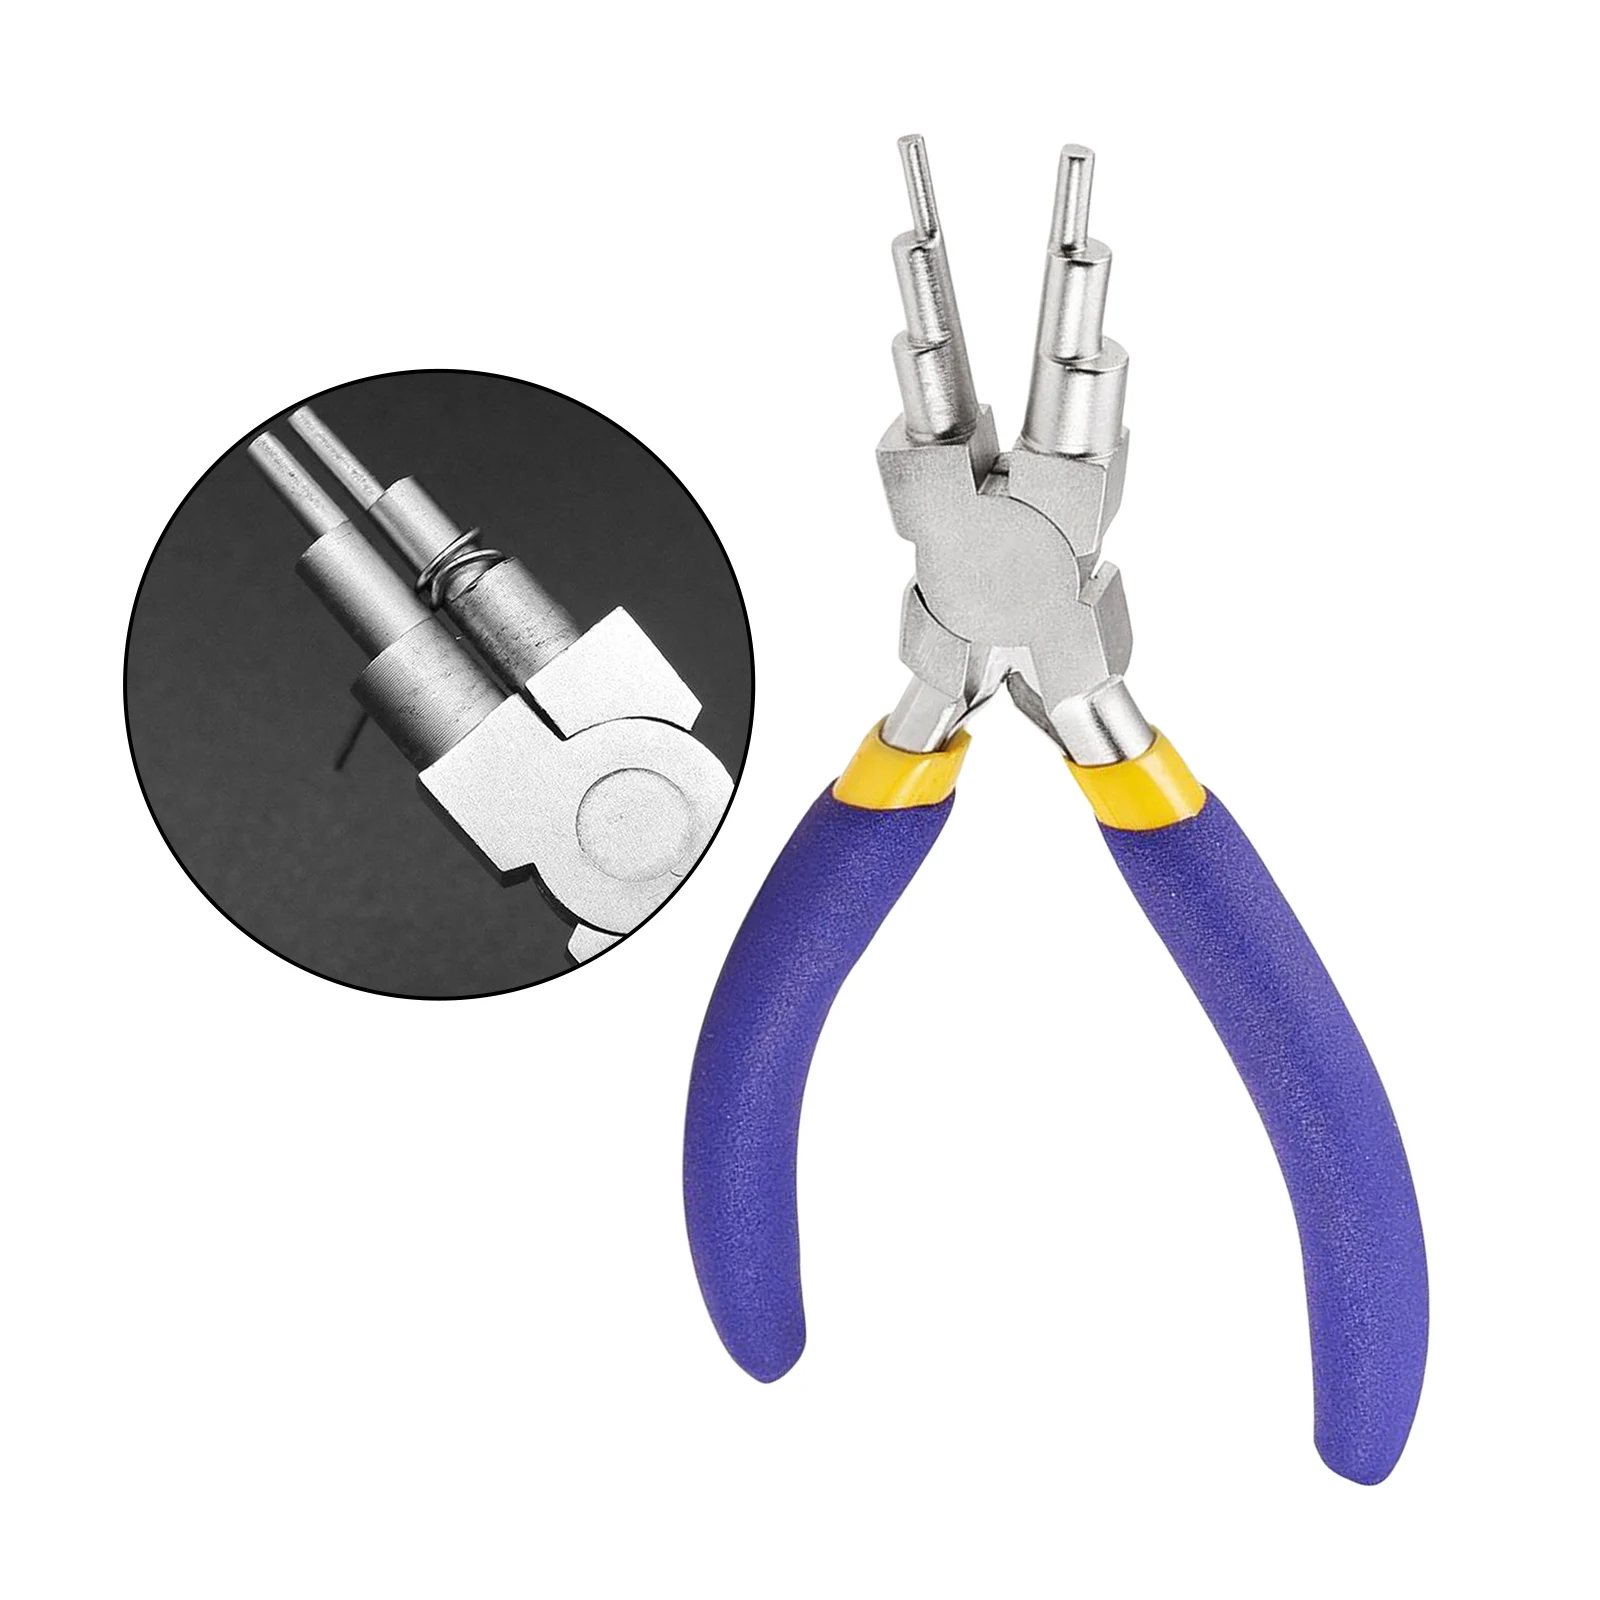 6 in 1 Wire Looping Forming Bail Making Pliers Non-slip Comfort Grip Handle